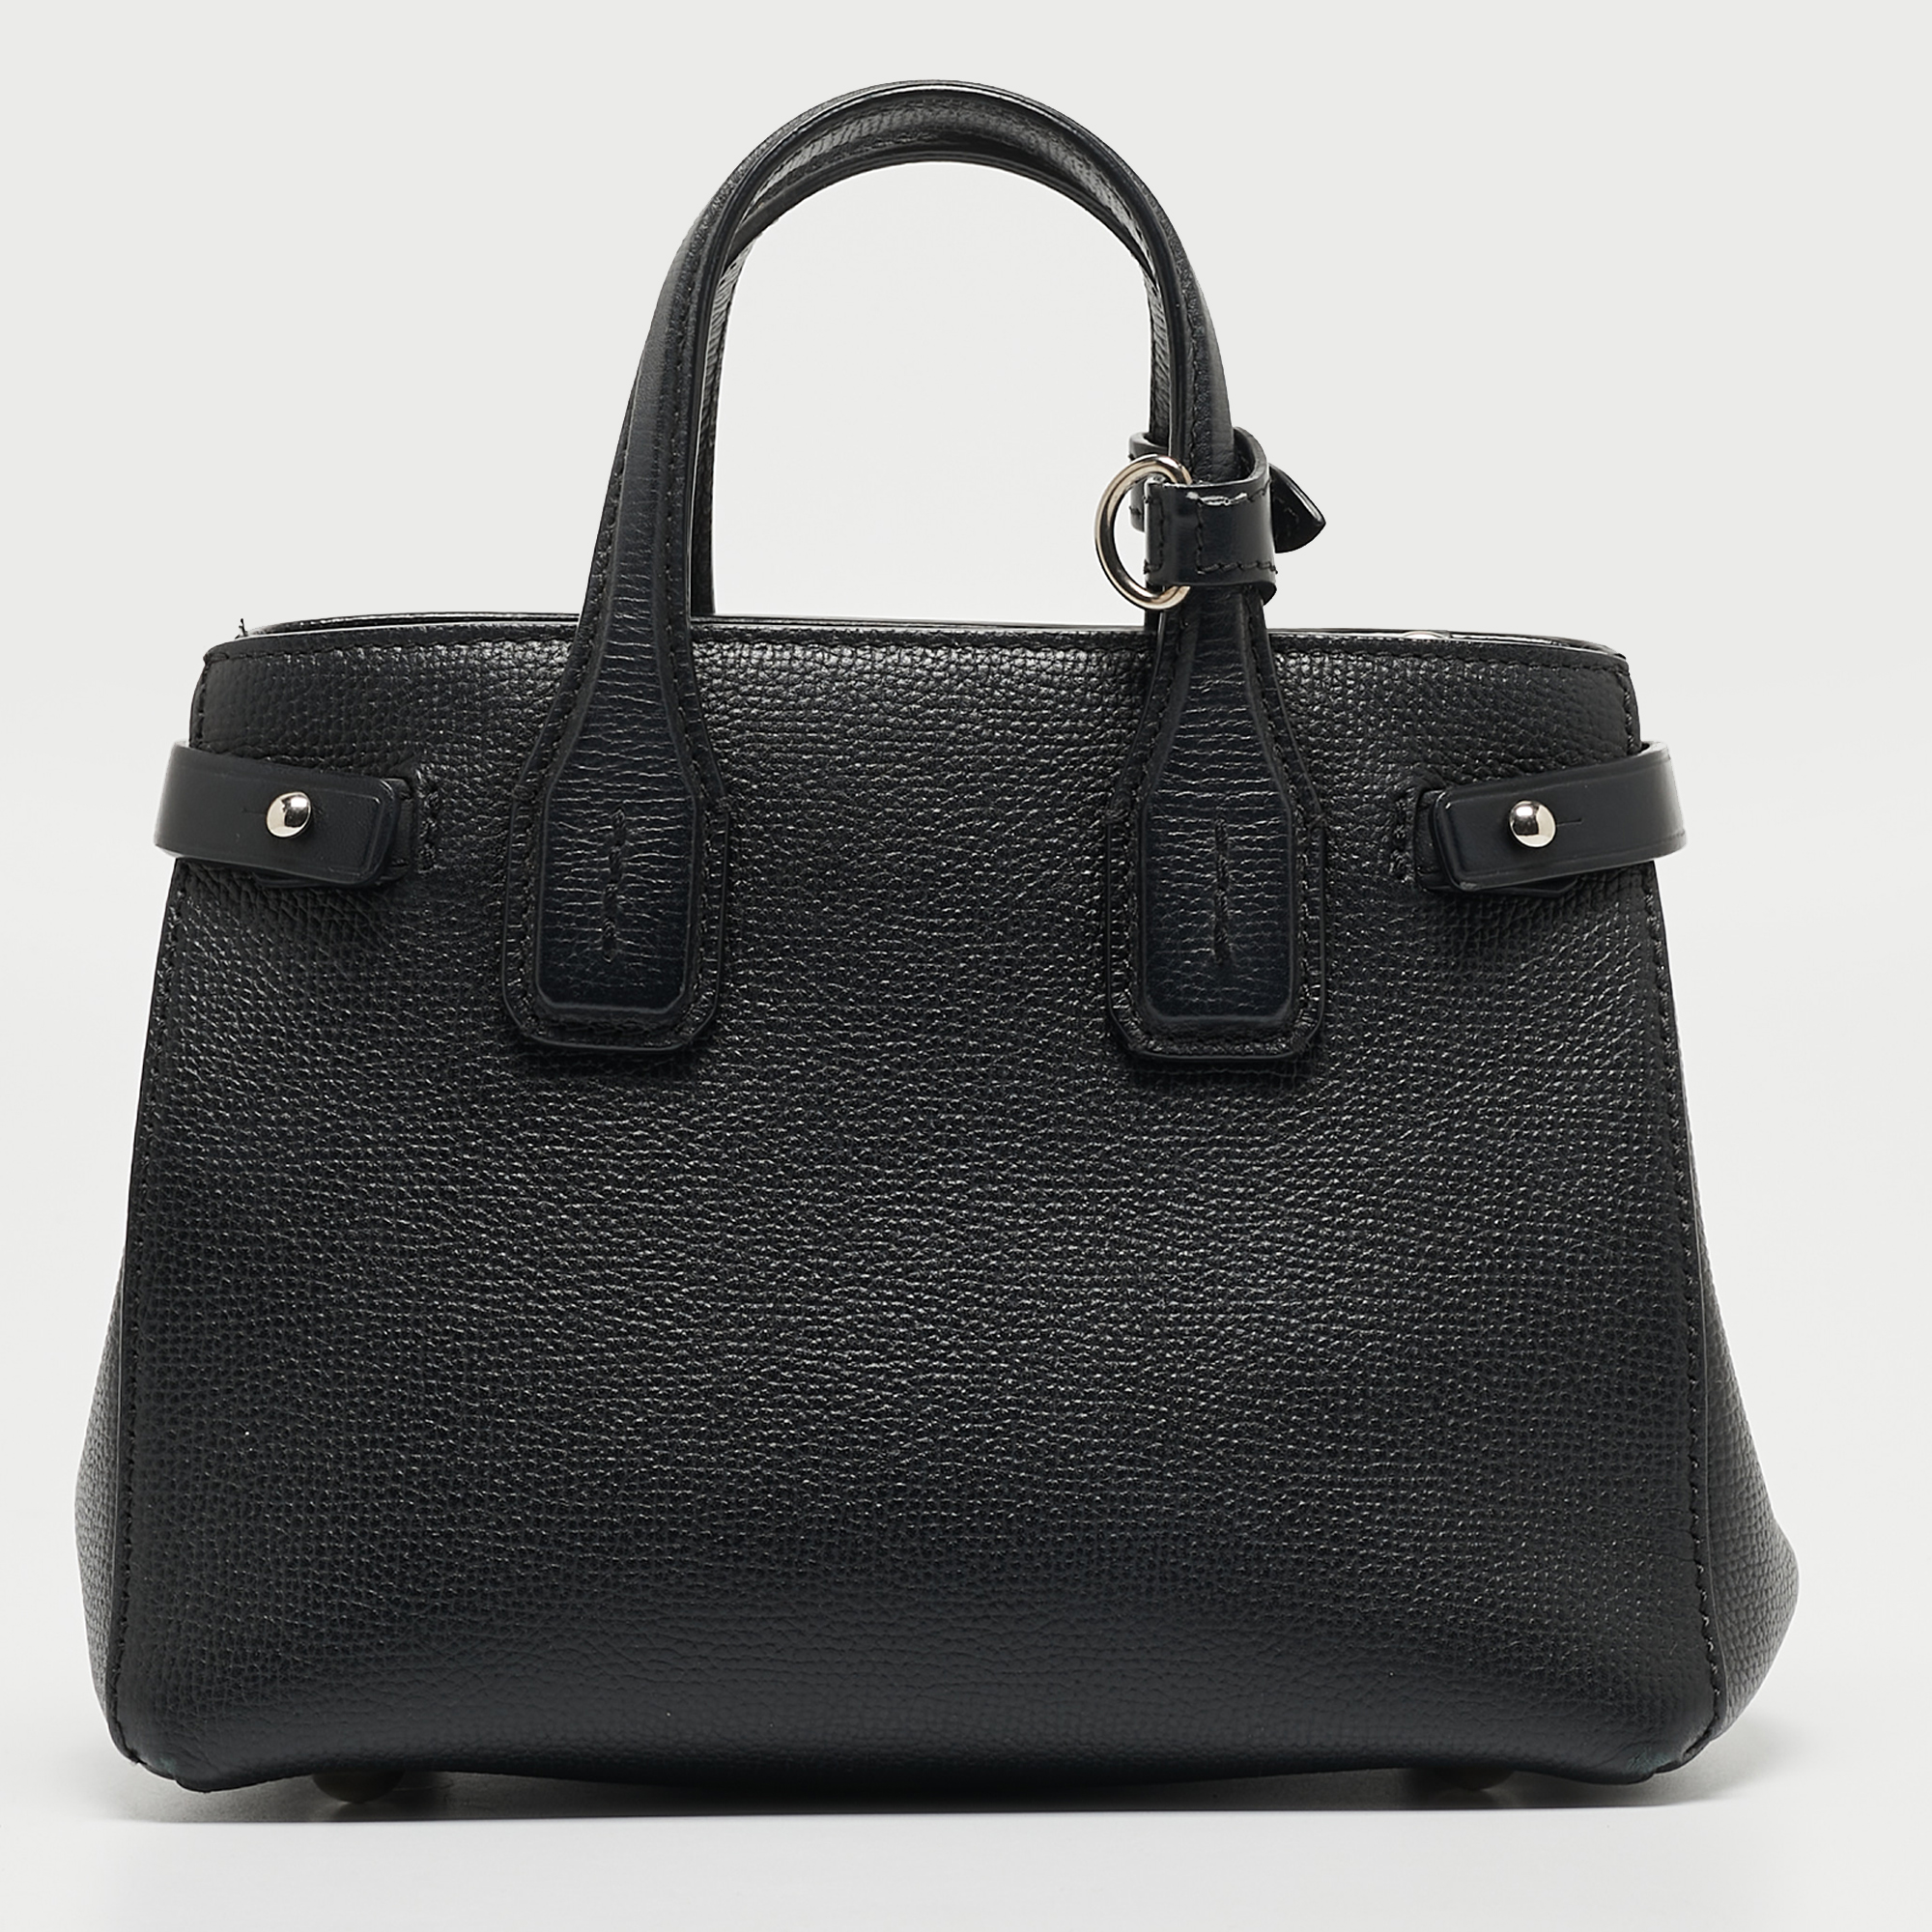 Burberry Black Leather Baby Banner Tote